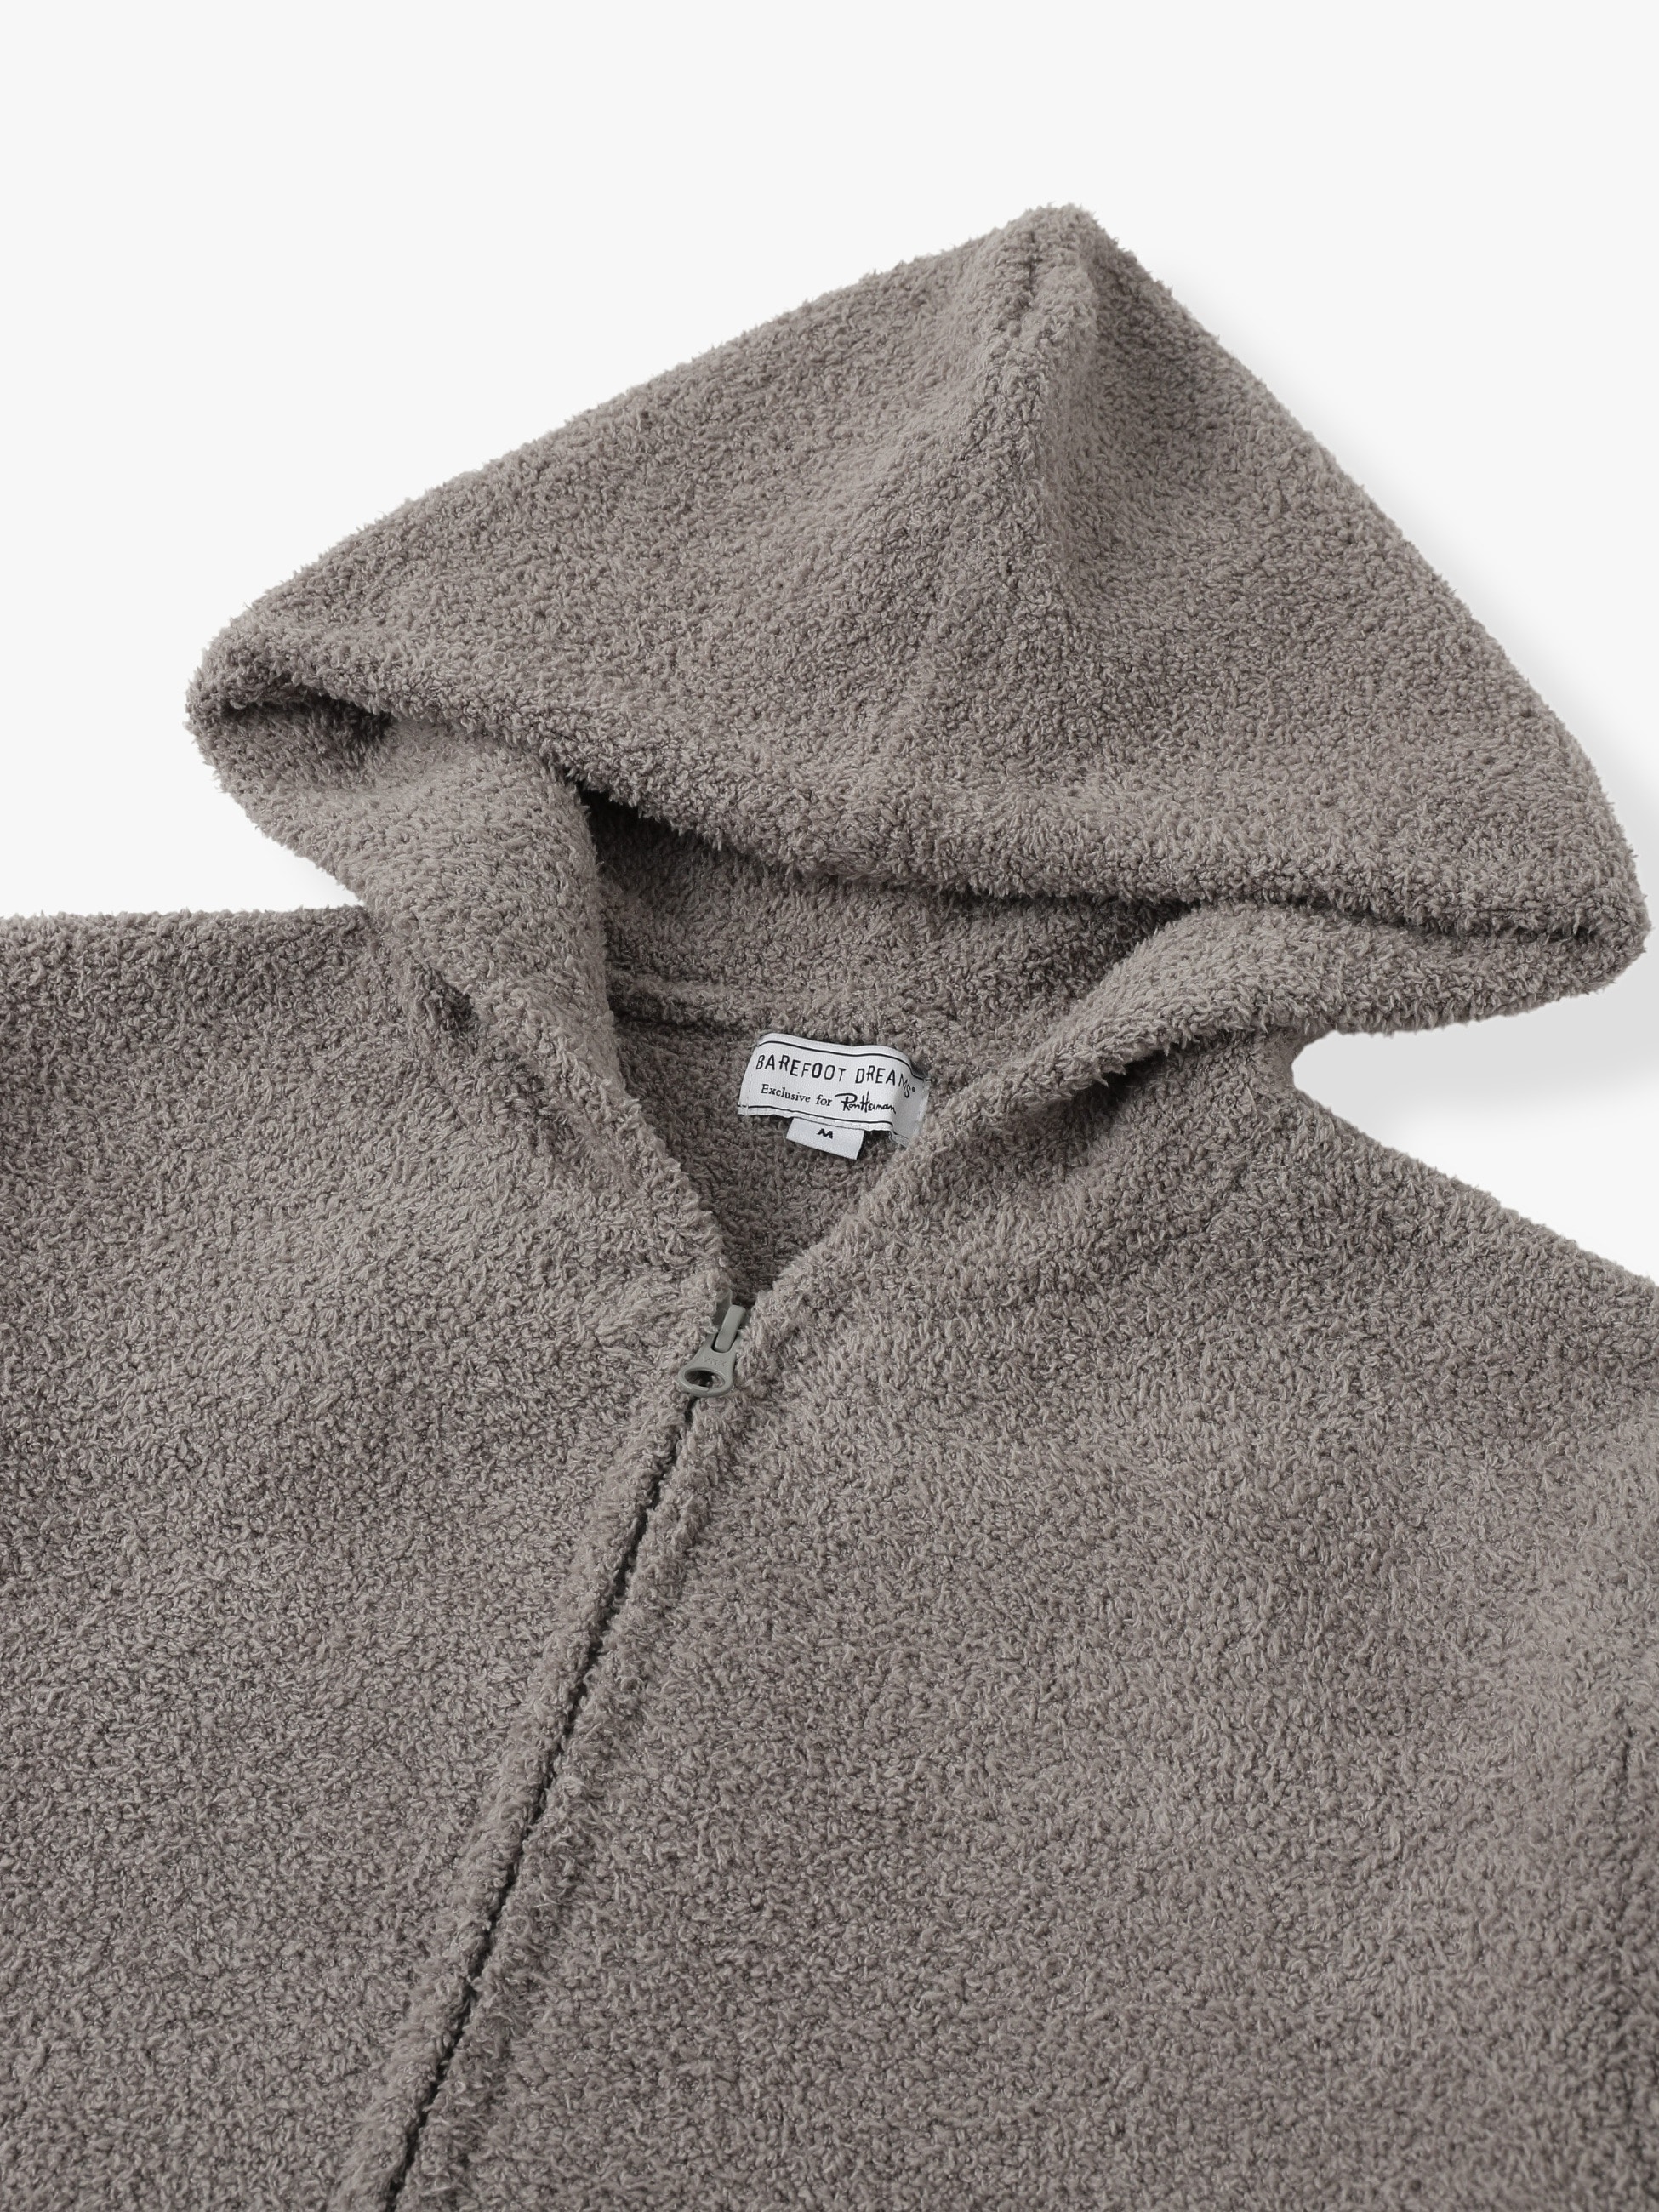 Double Jacquard Solid Hoodie｜BAREFOOT DREAMS for Ron Herman 